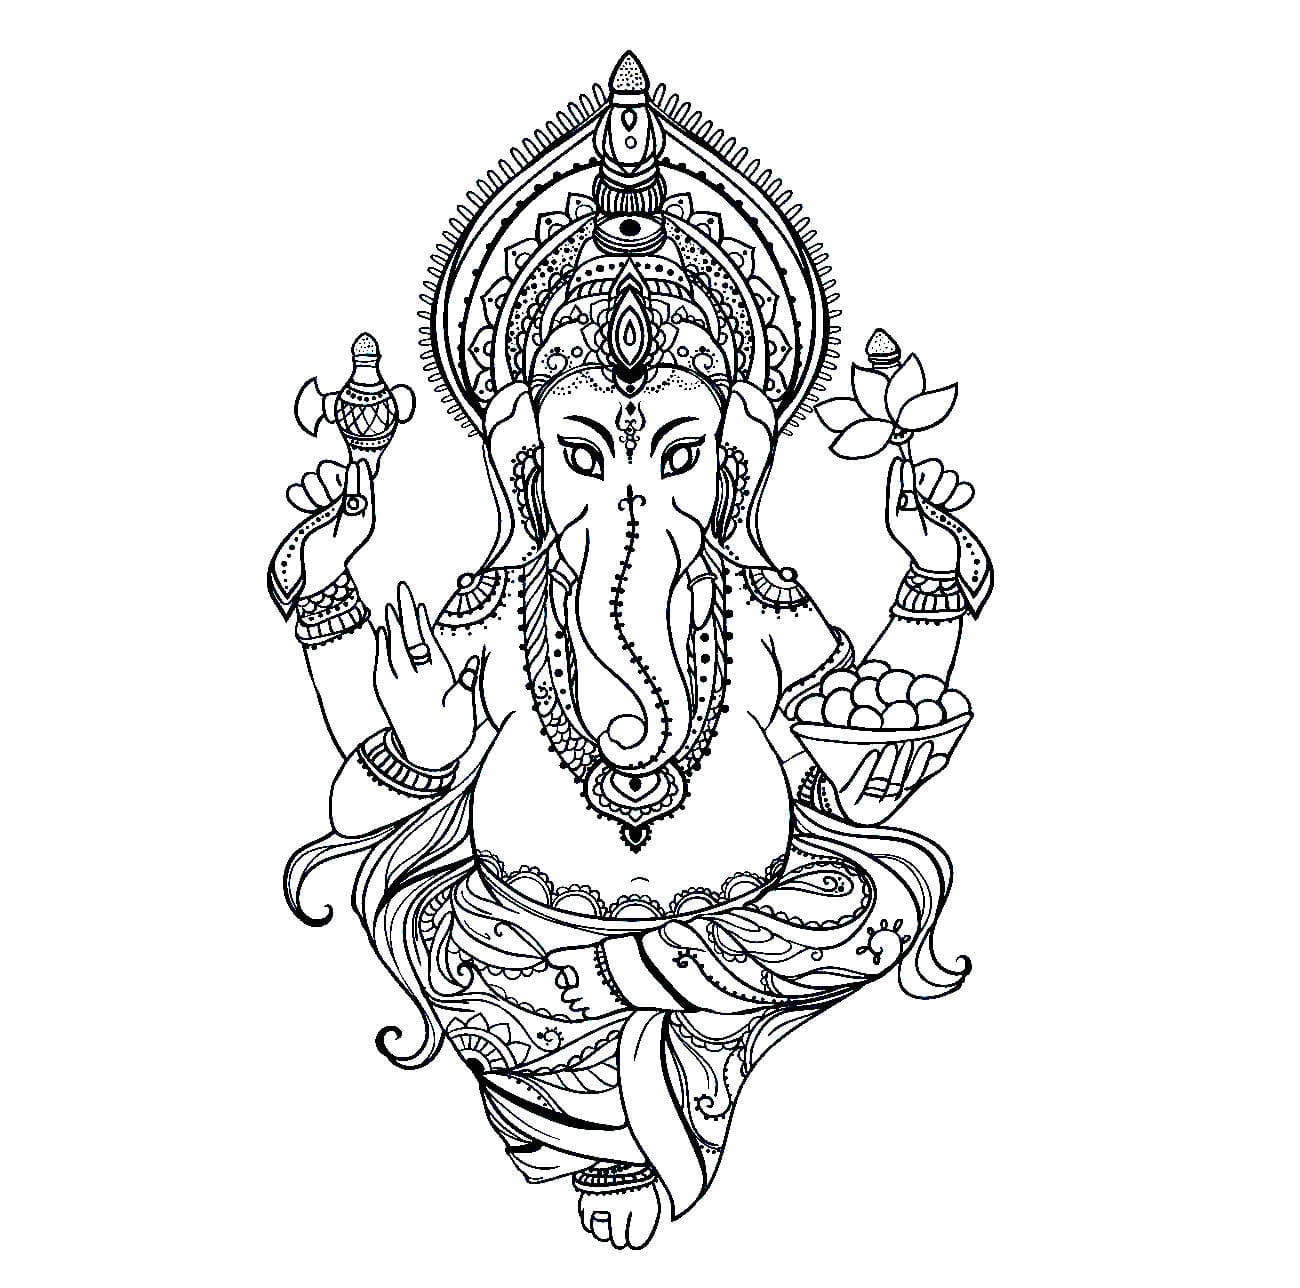 Ganesha Coloring Pages. Print for Free | WONDER DAY — Coloring pages for  children and adults